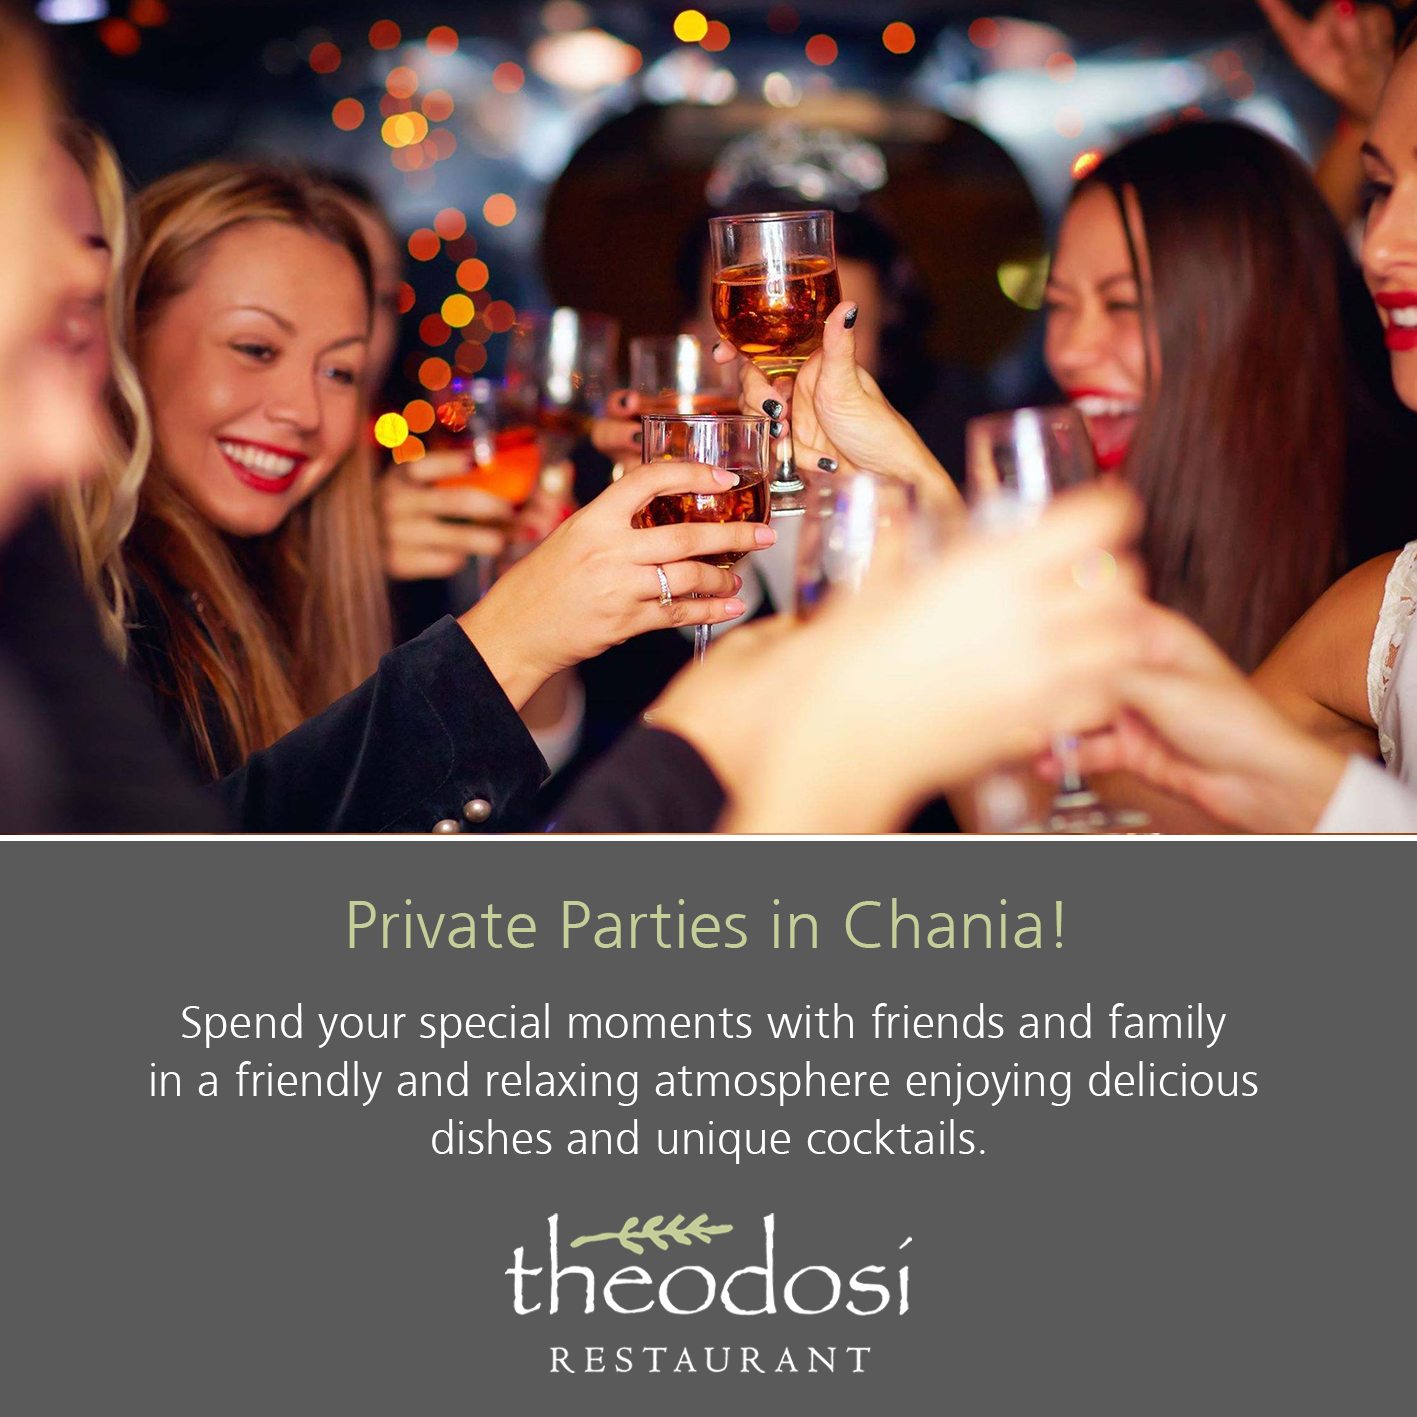 Private Parties in Chania!